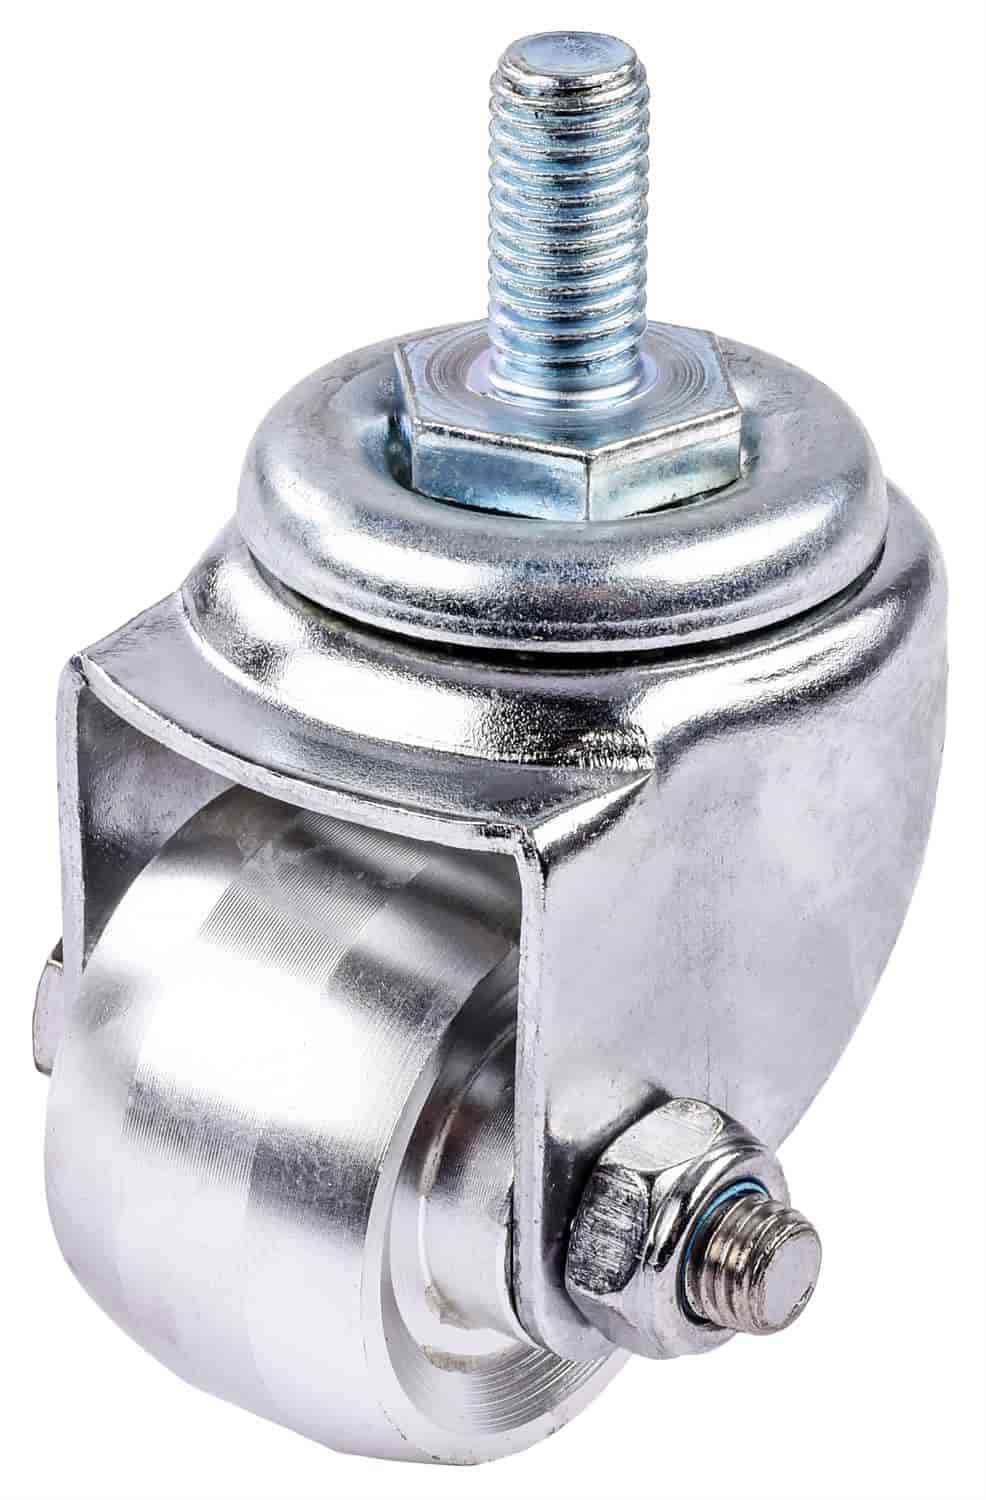 Replacement Rear Caster Fits JEGS Professional Low-Profile 3-Ton